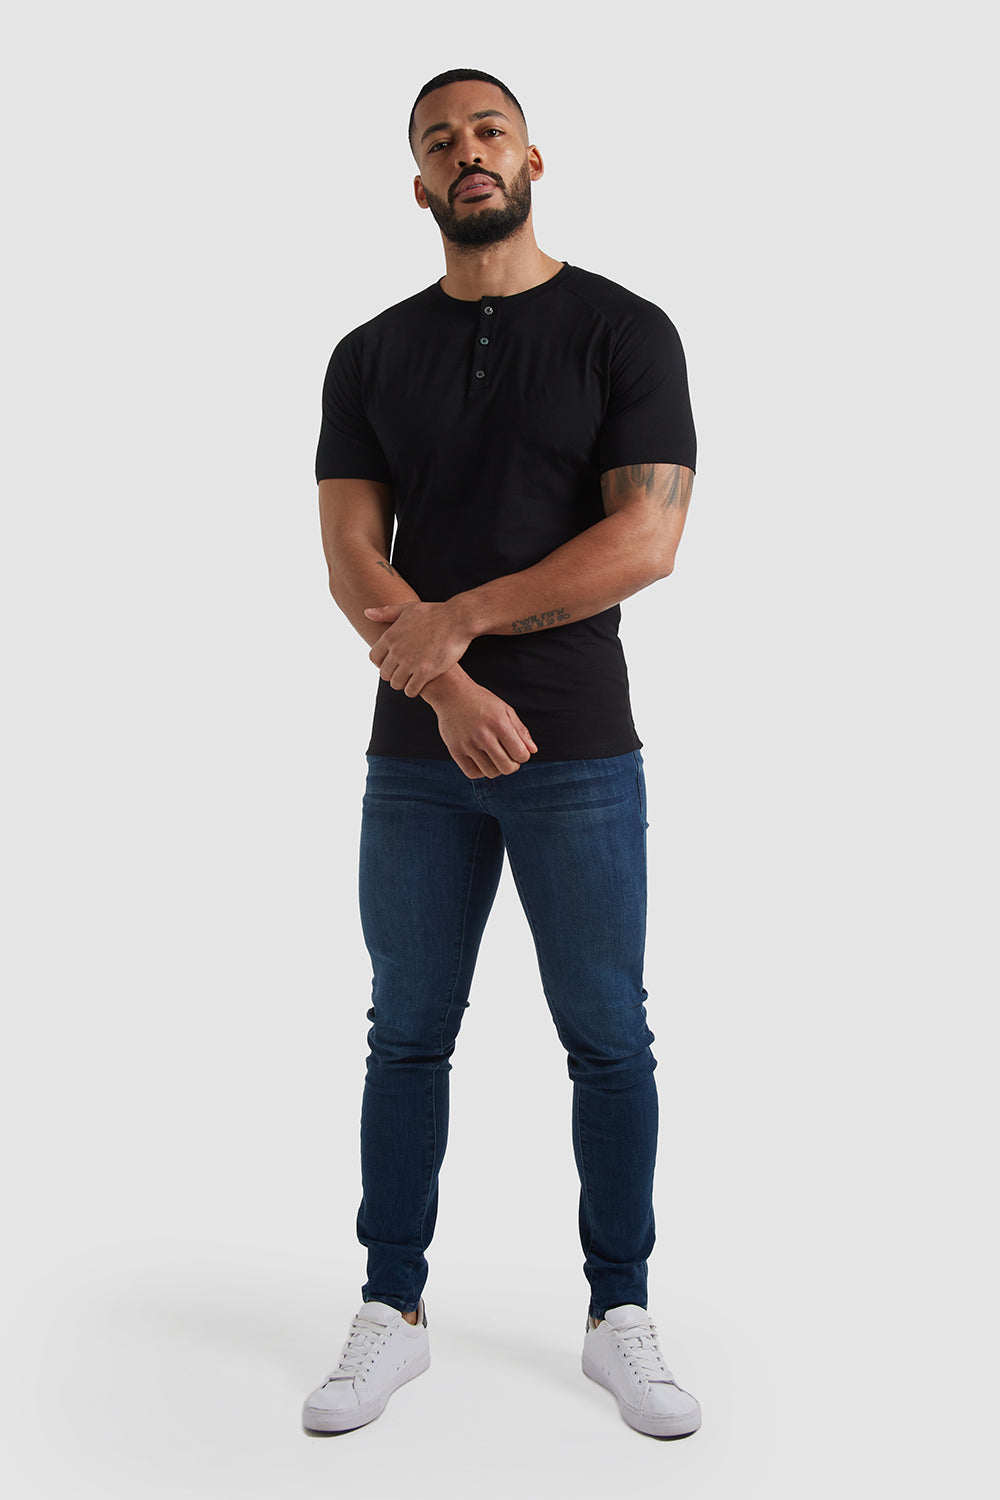 Everyday Henley T-Shirt in Black - TAILORED ATHLETE - ROW